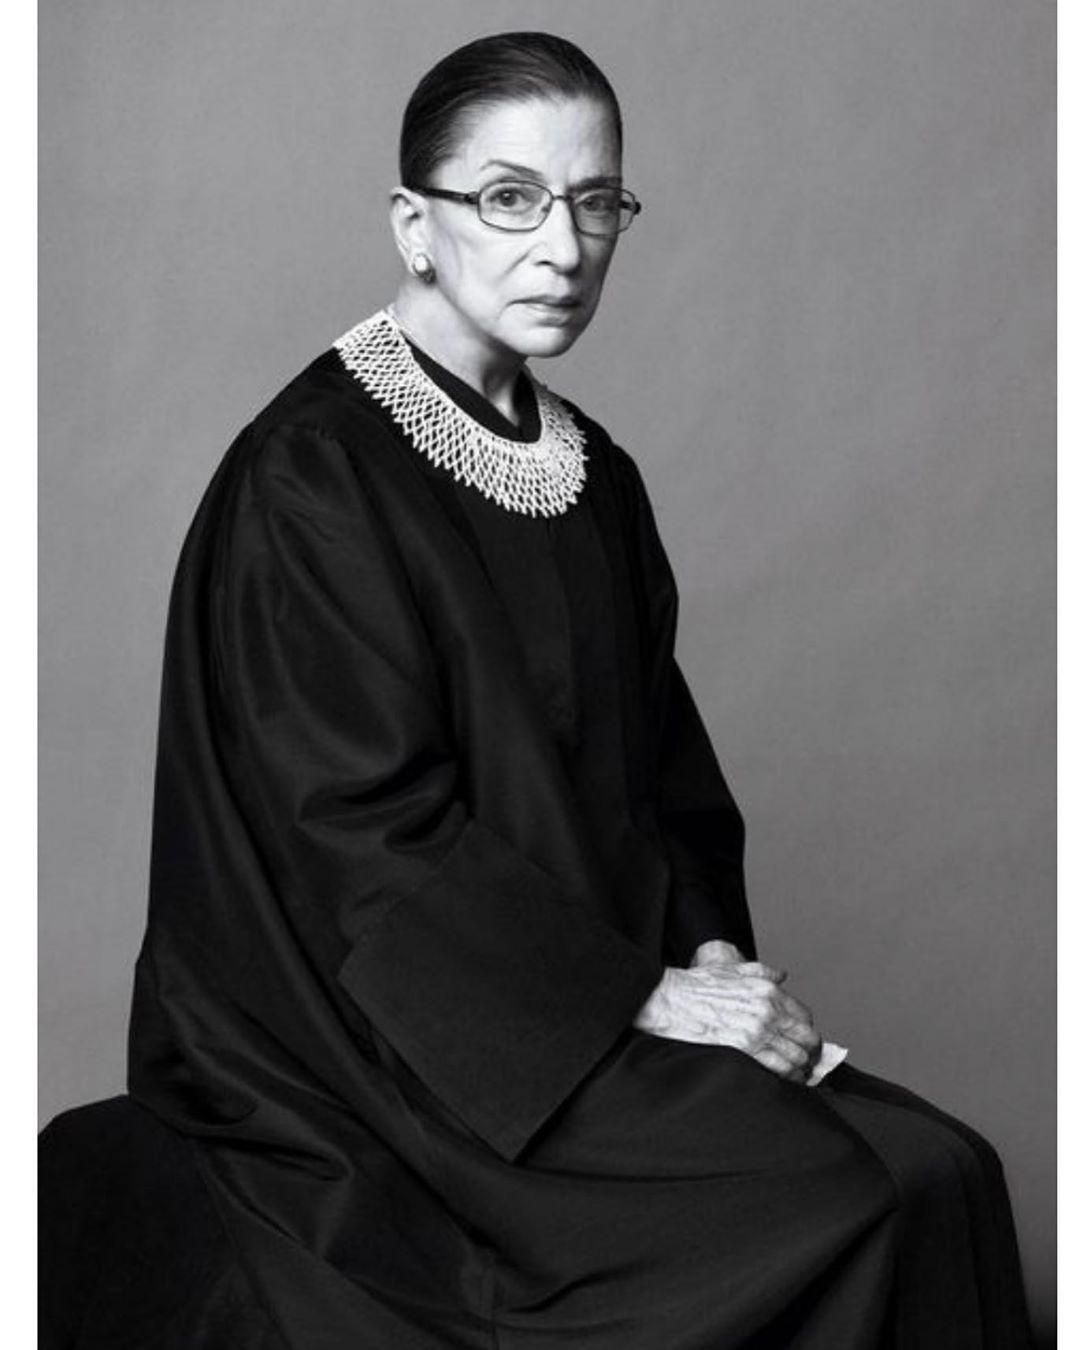 Amber Valletta - Thank you Justice Ruth Bader Ginsburg for upholding, challenging and fighting for abortion rights, same-sex marriage, voting rights, immigration, health care and affirmative action. #...